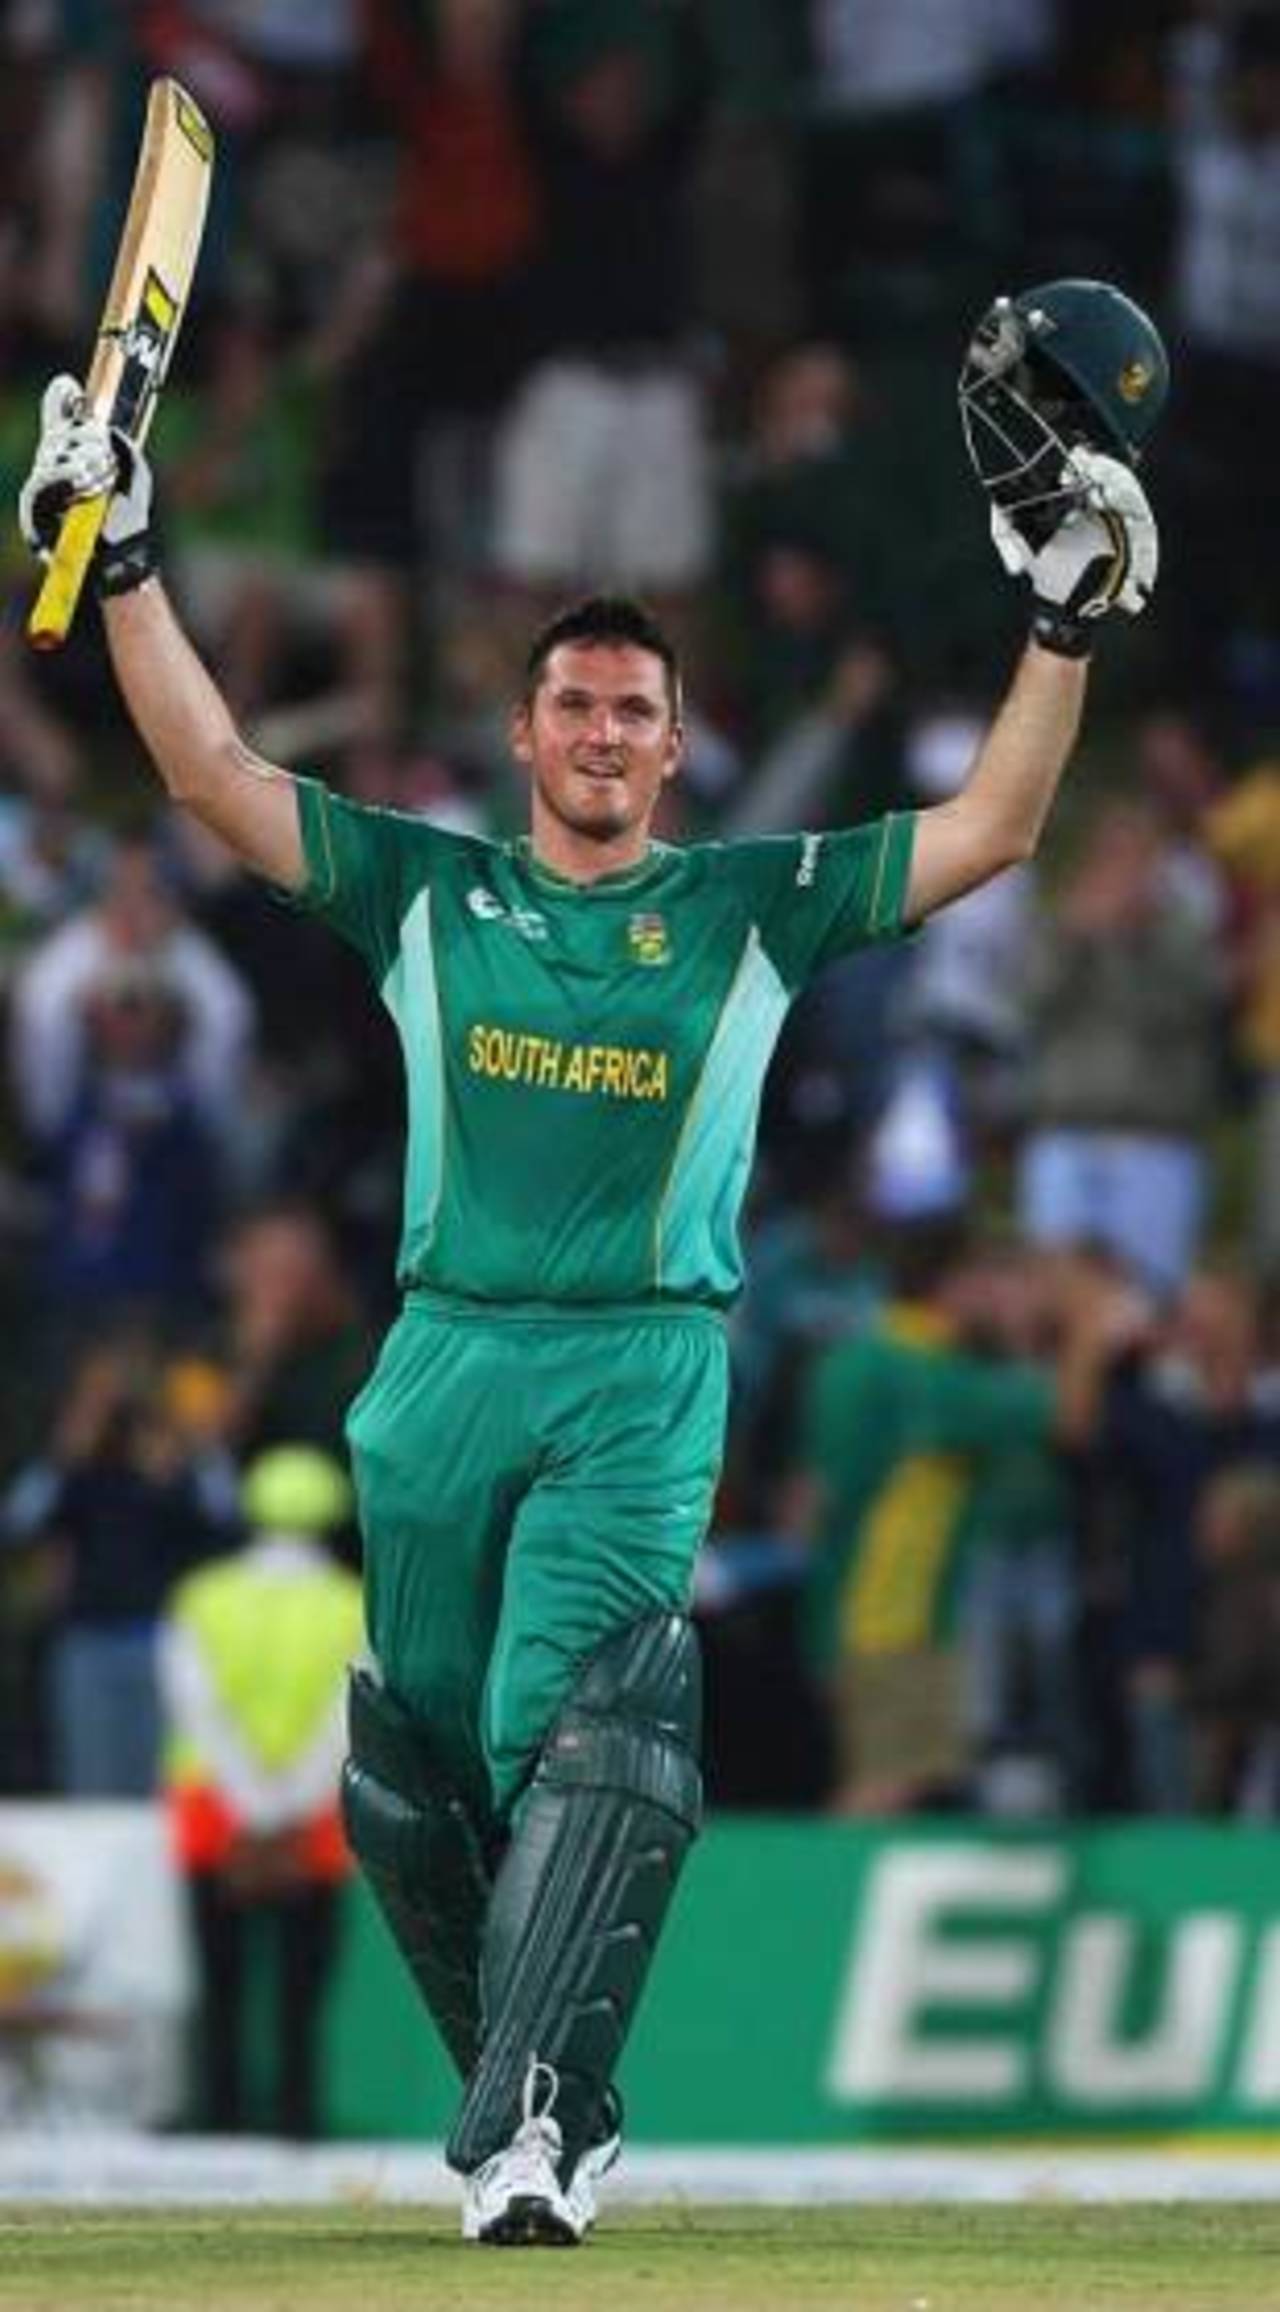 The hopes of more than 16,000 people at Centurion clung to one man, Graeme Smith&nbsp;&nbsp;&bull;&nbsp;&nbsp;Getty Images